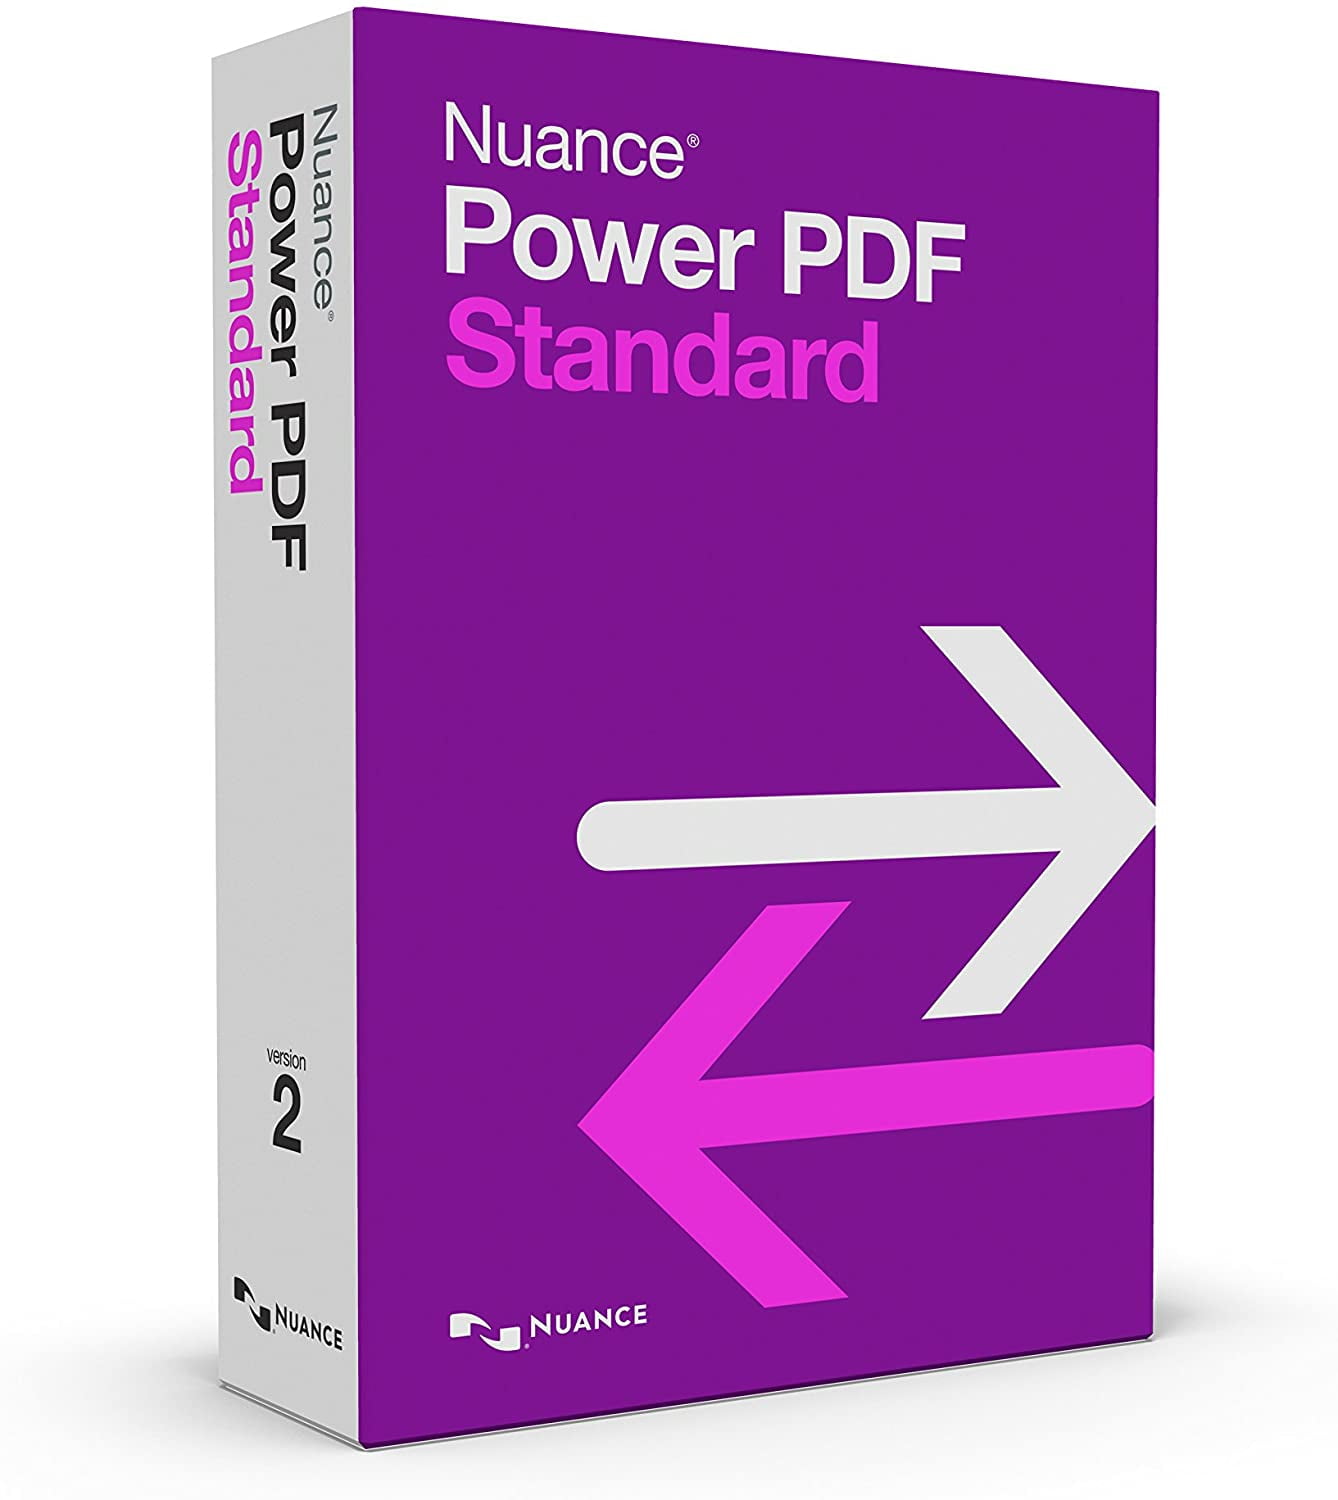 Nuance power pdf standard update reviews for carefirst blue preferred ppo cdh silver 2000